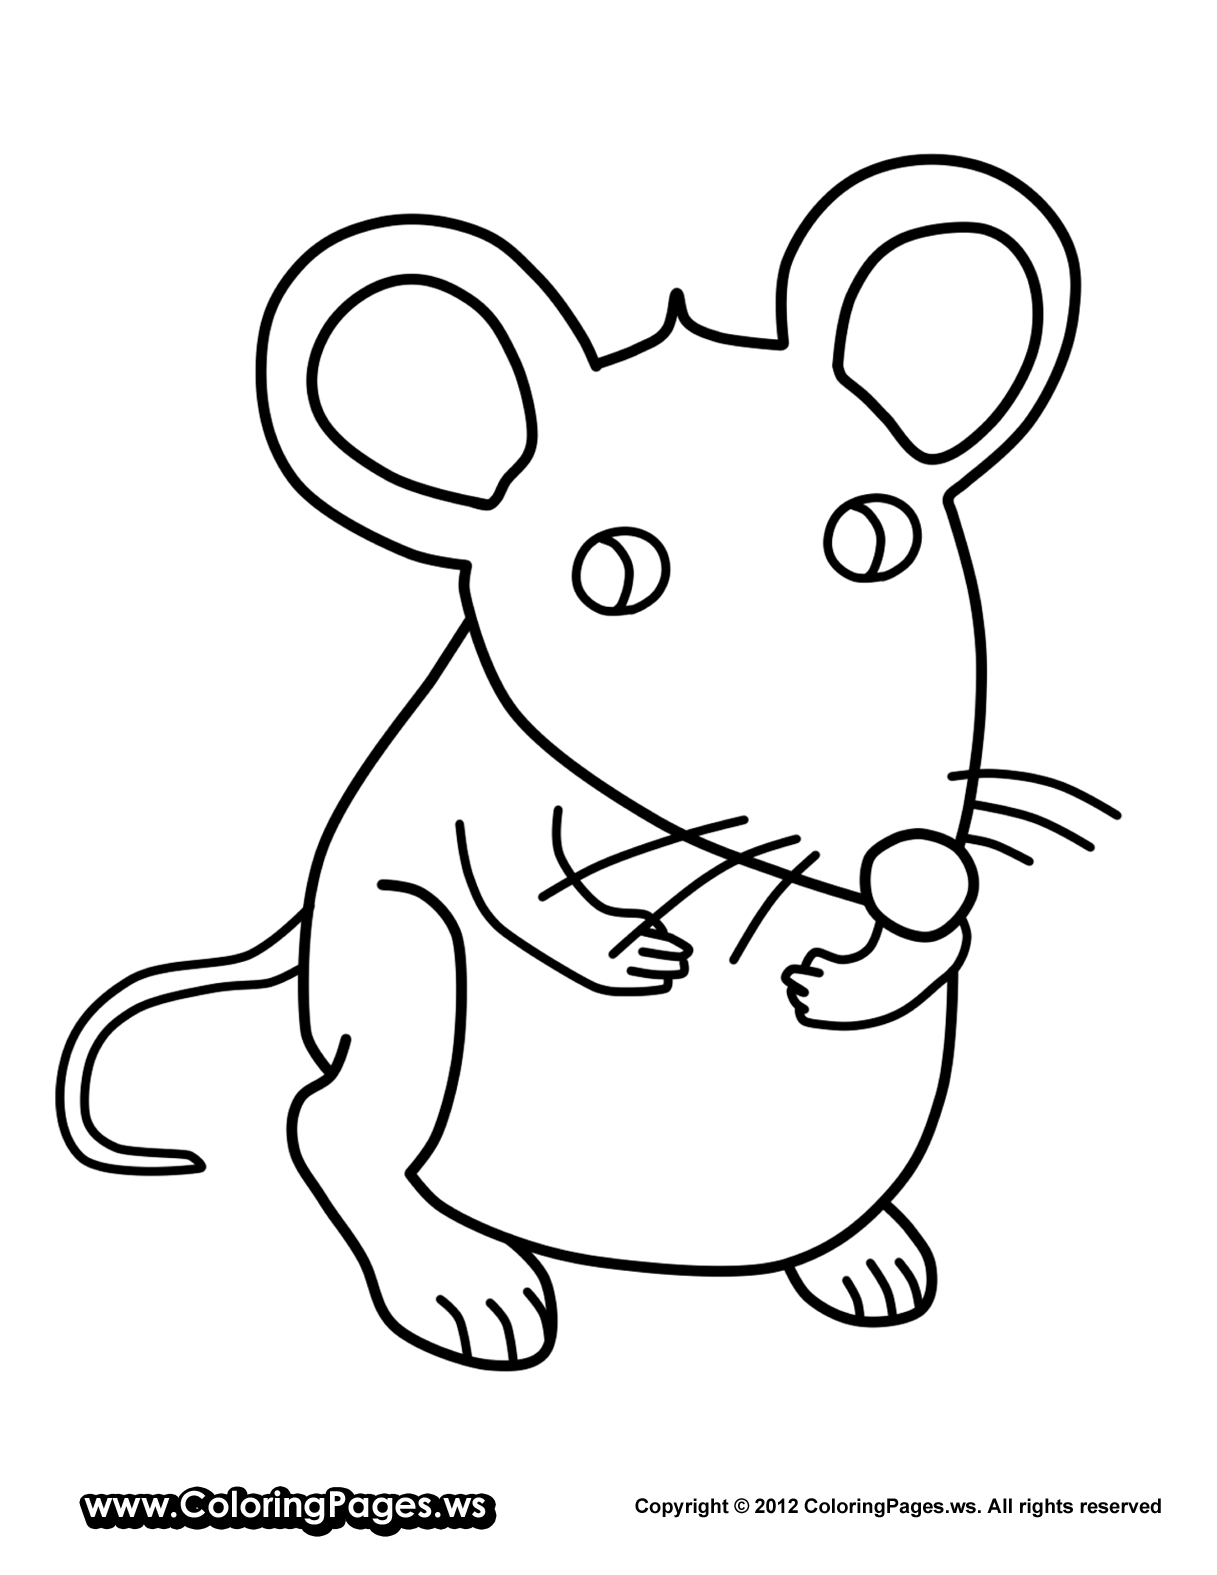 Mouse coloring pages to download and print for free